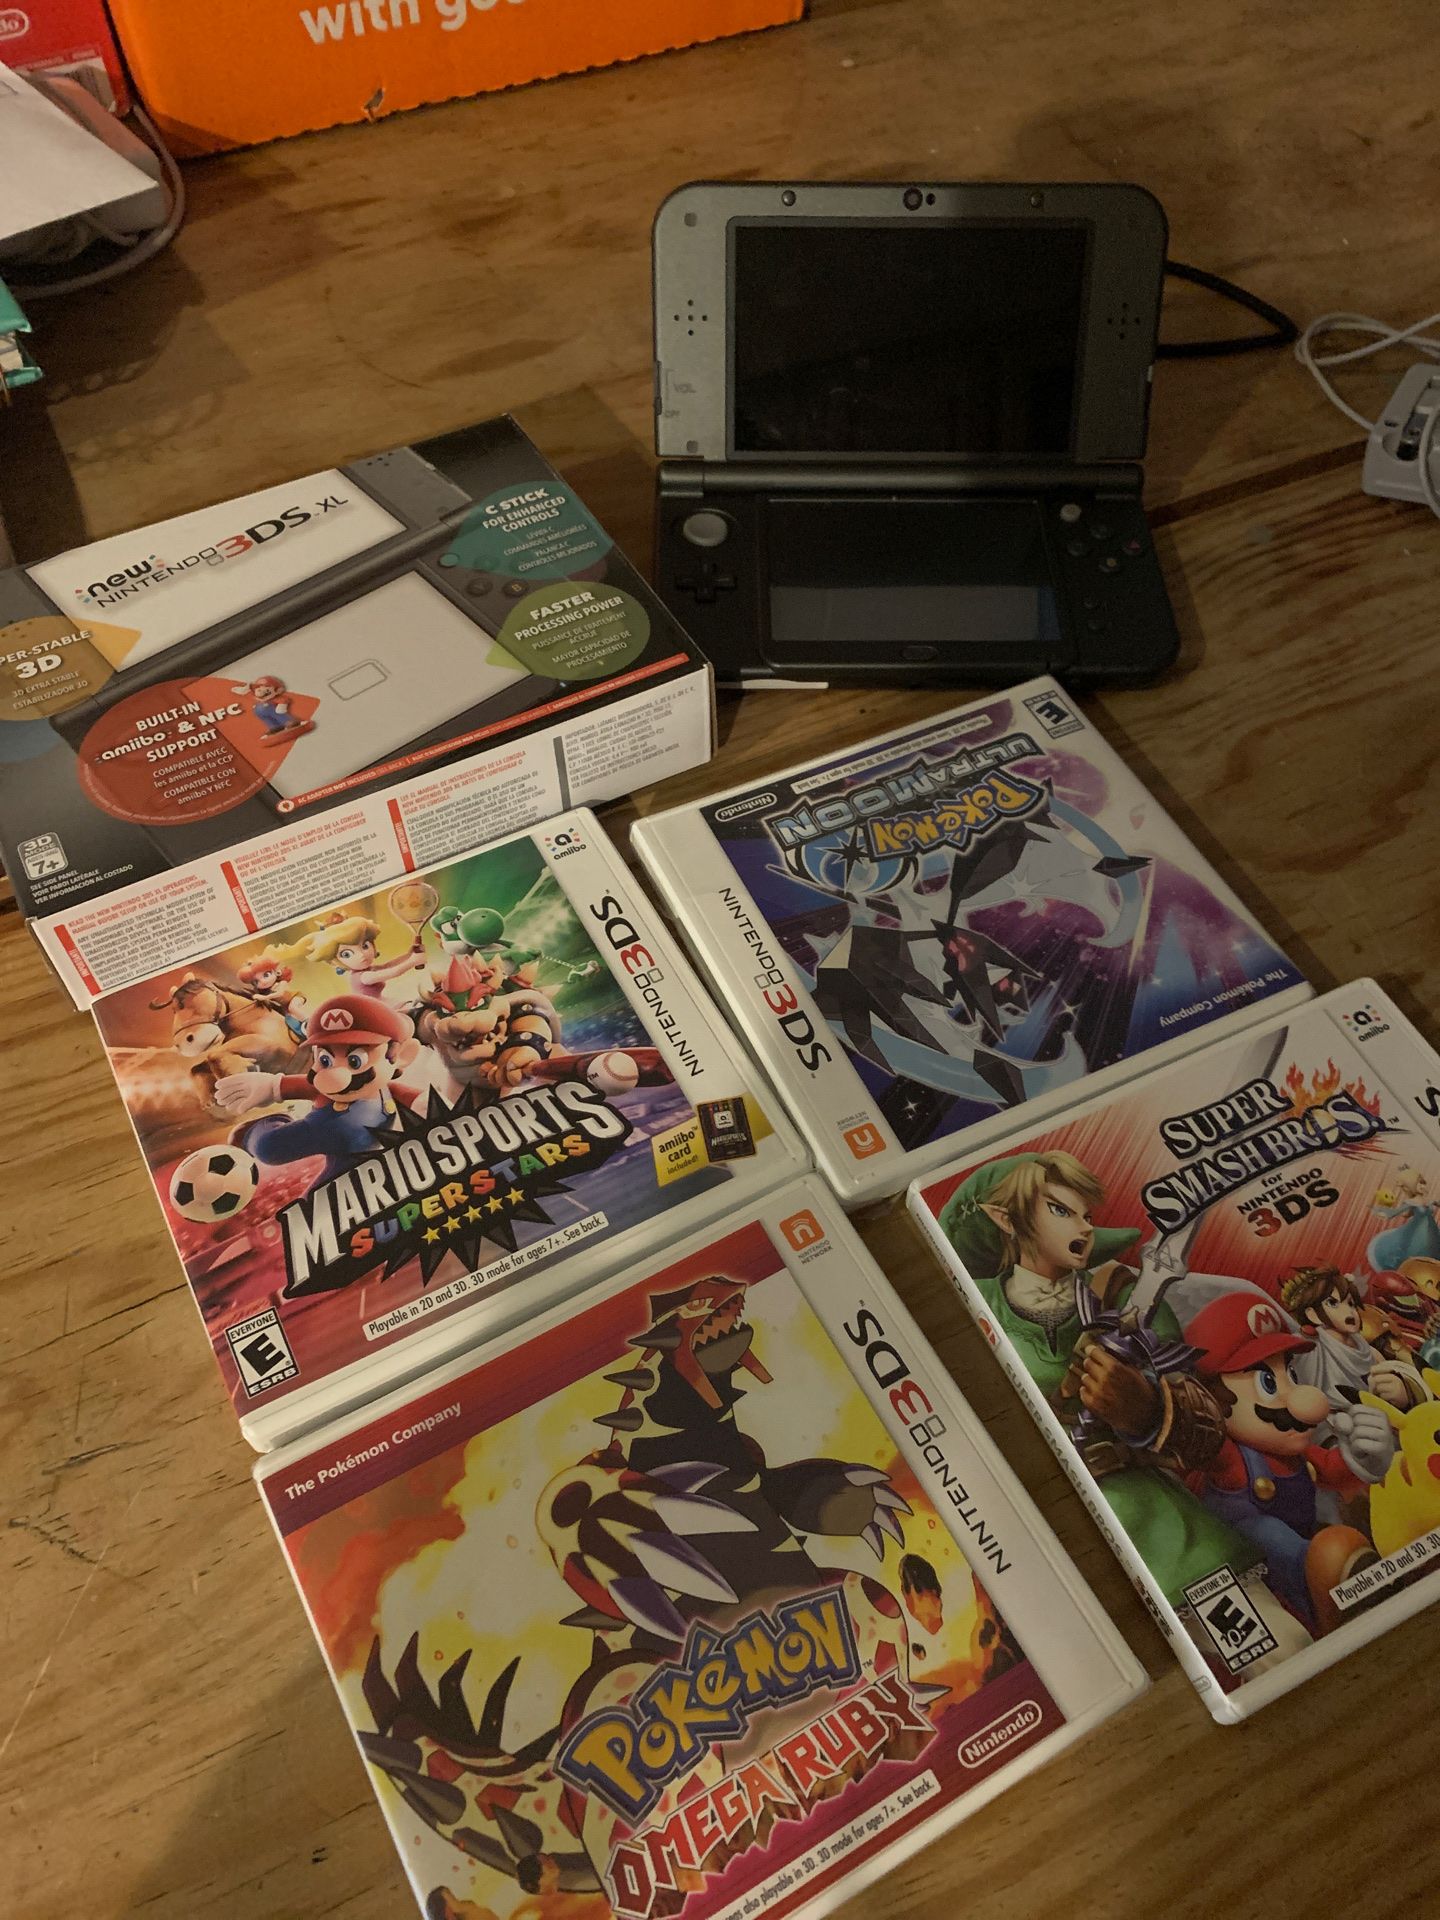 Nintendo 3DS XL never used with 4 games